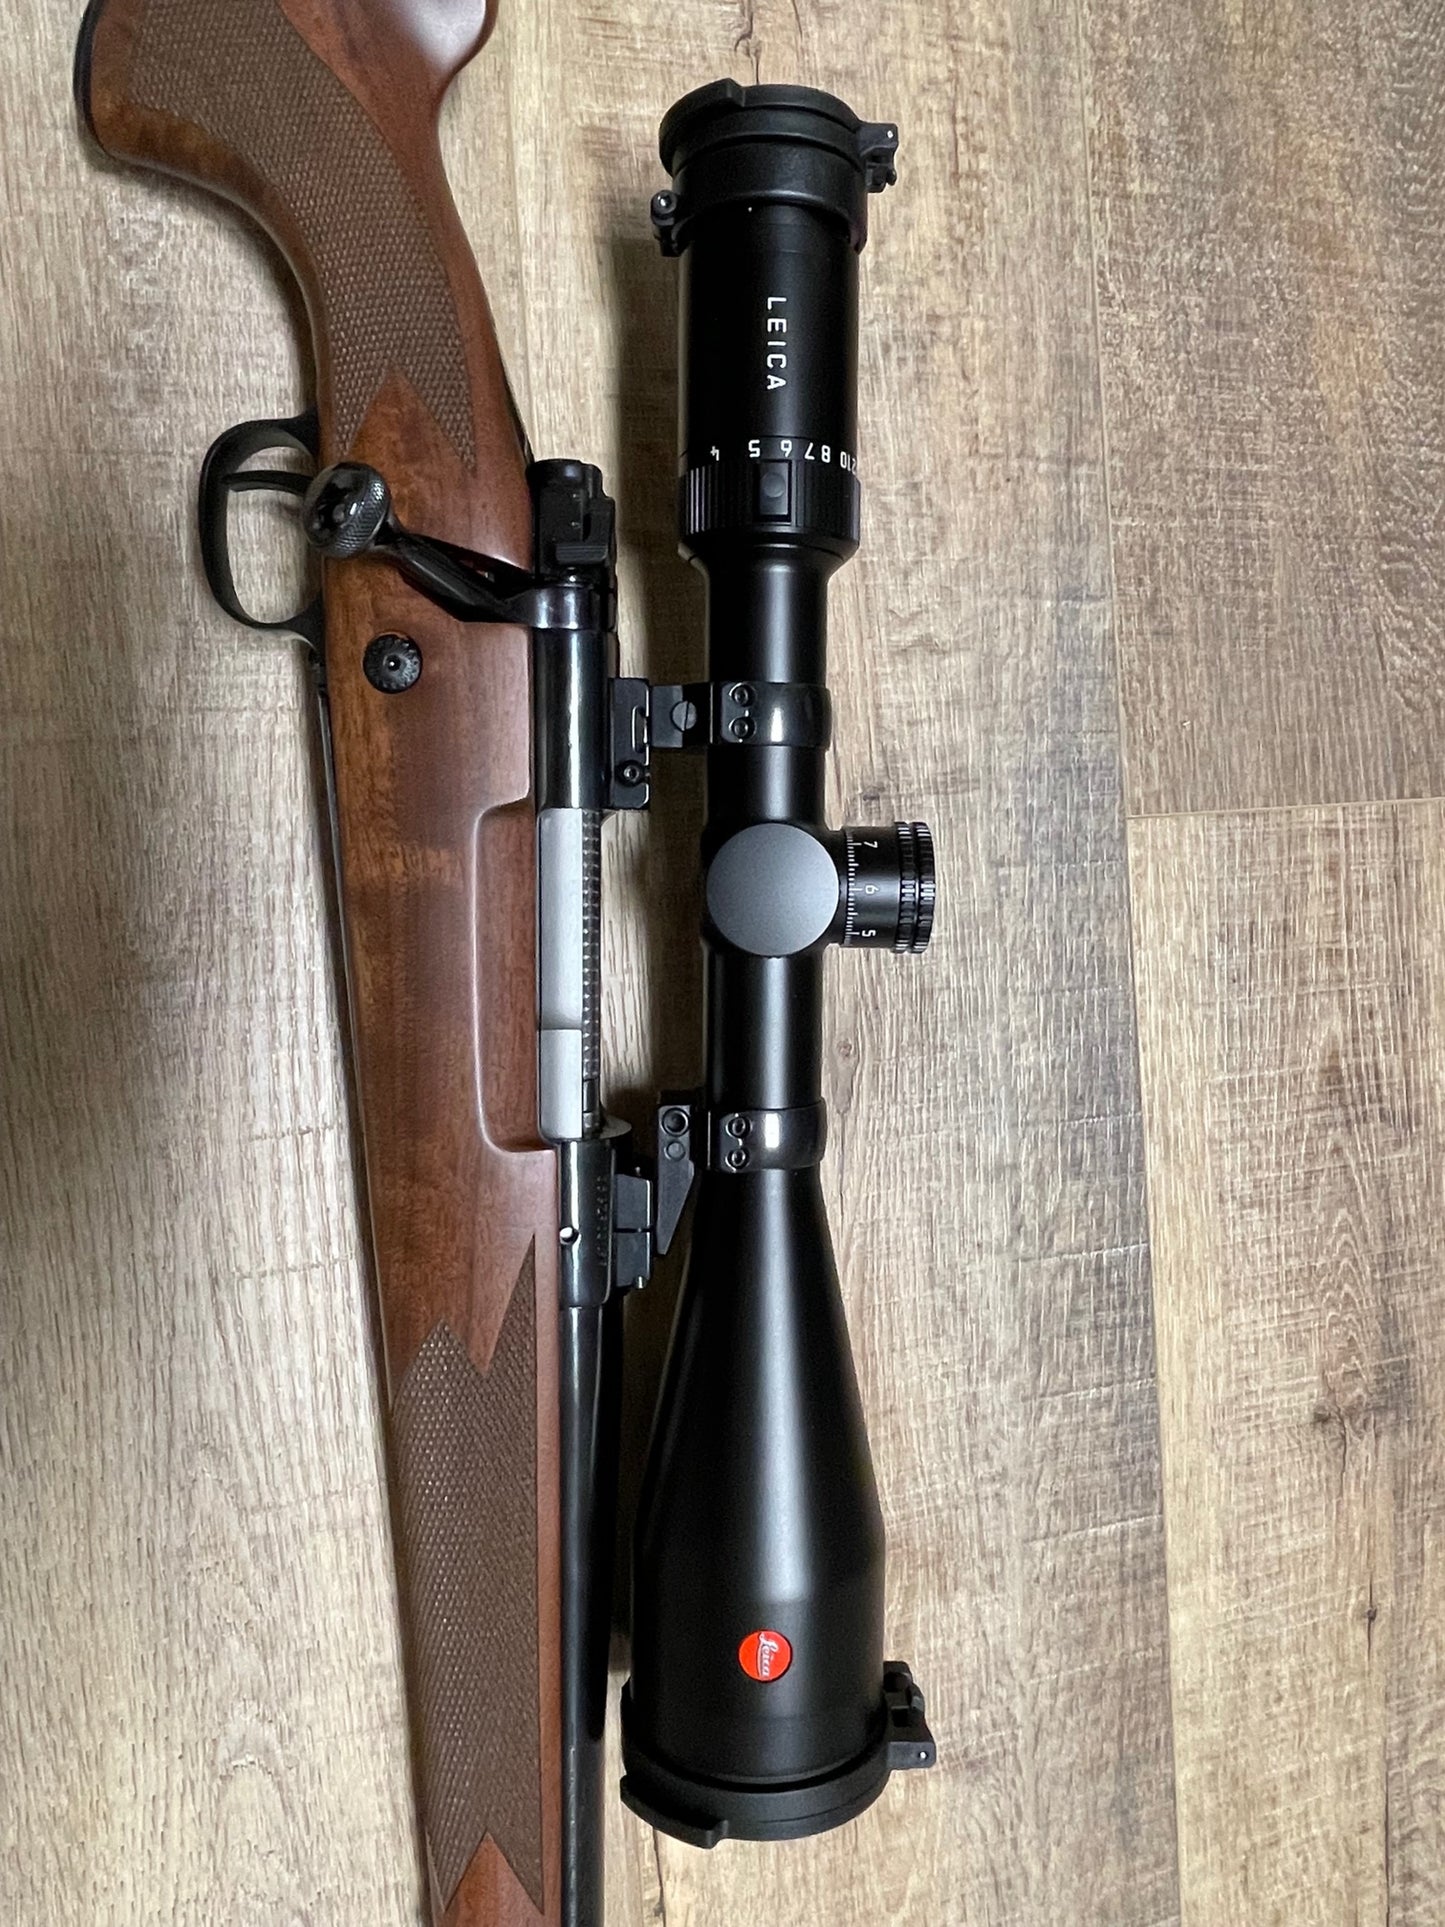 Tenebraex Scope covers for LEICA PRS and AMPLUS 6 Riflescopes - Shooting Warehouse